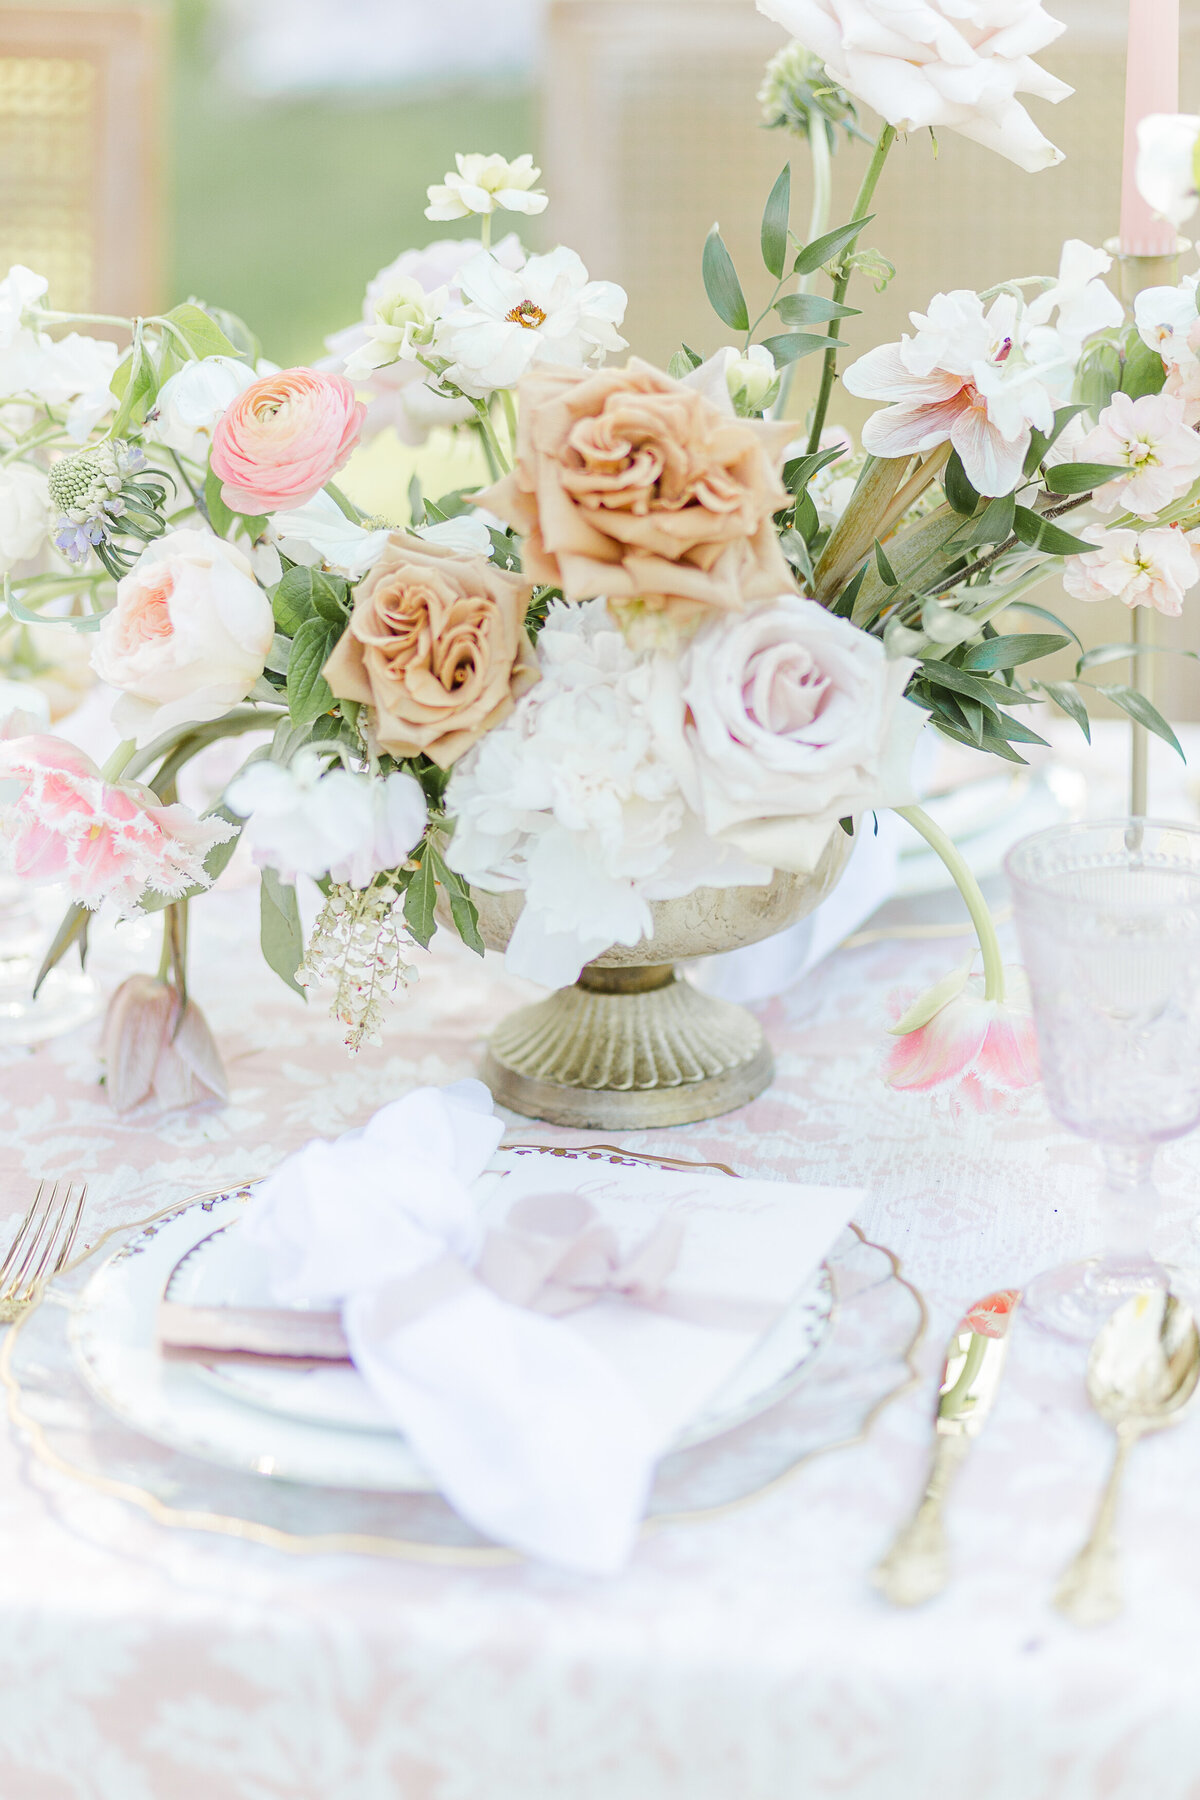 Detail image of table centrepieces featuring white, blush, and cream coloured flowers. Captured by best Massachusetts wedding photographer Lia Rose Weddings